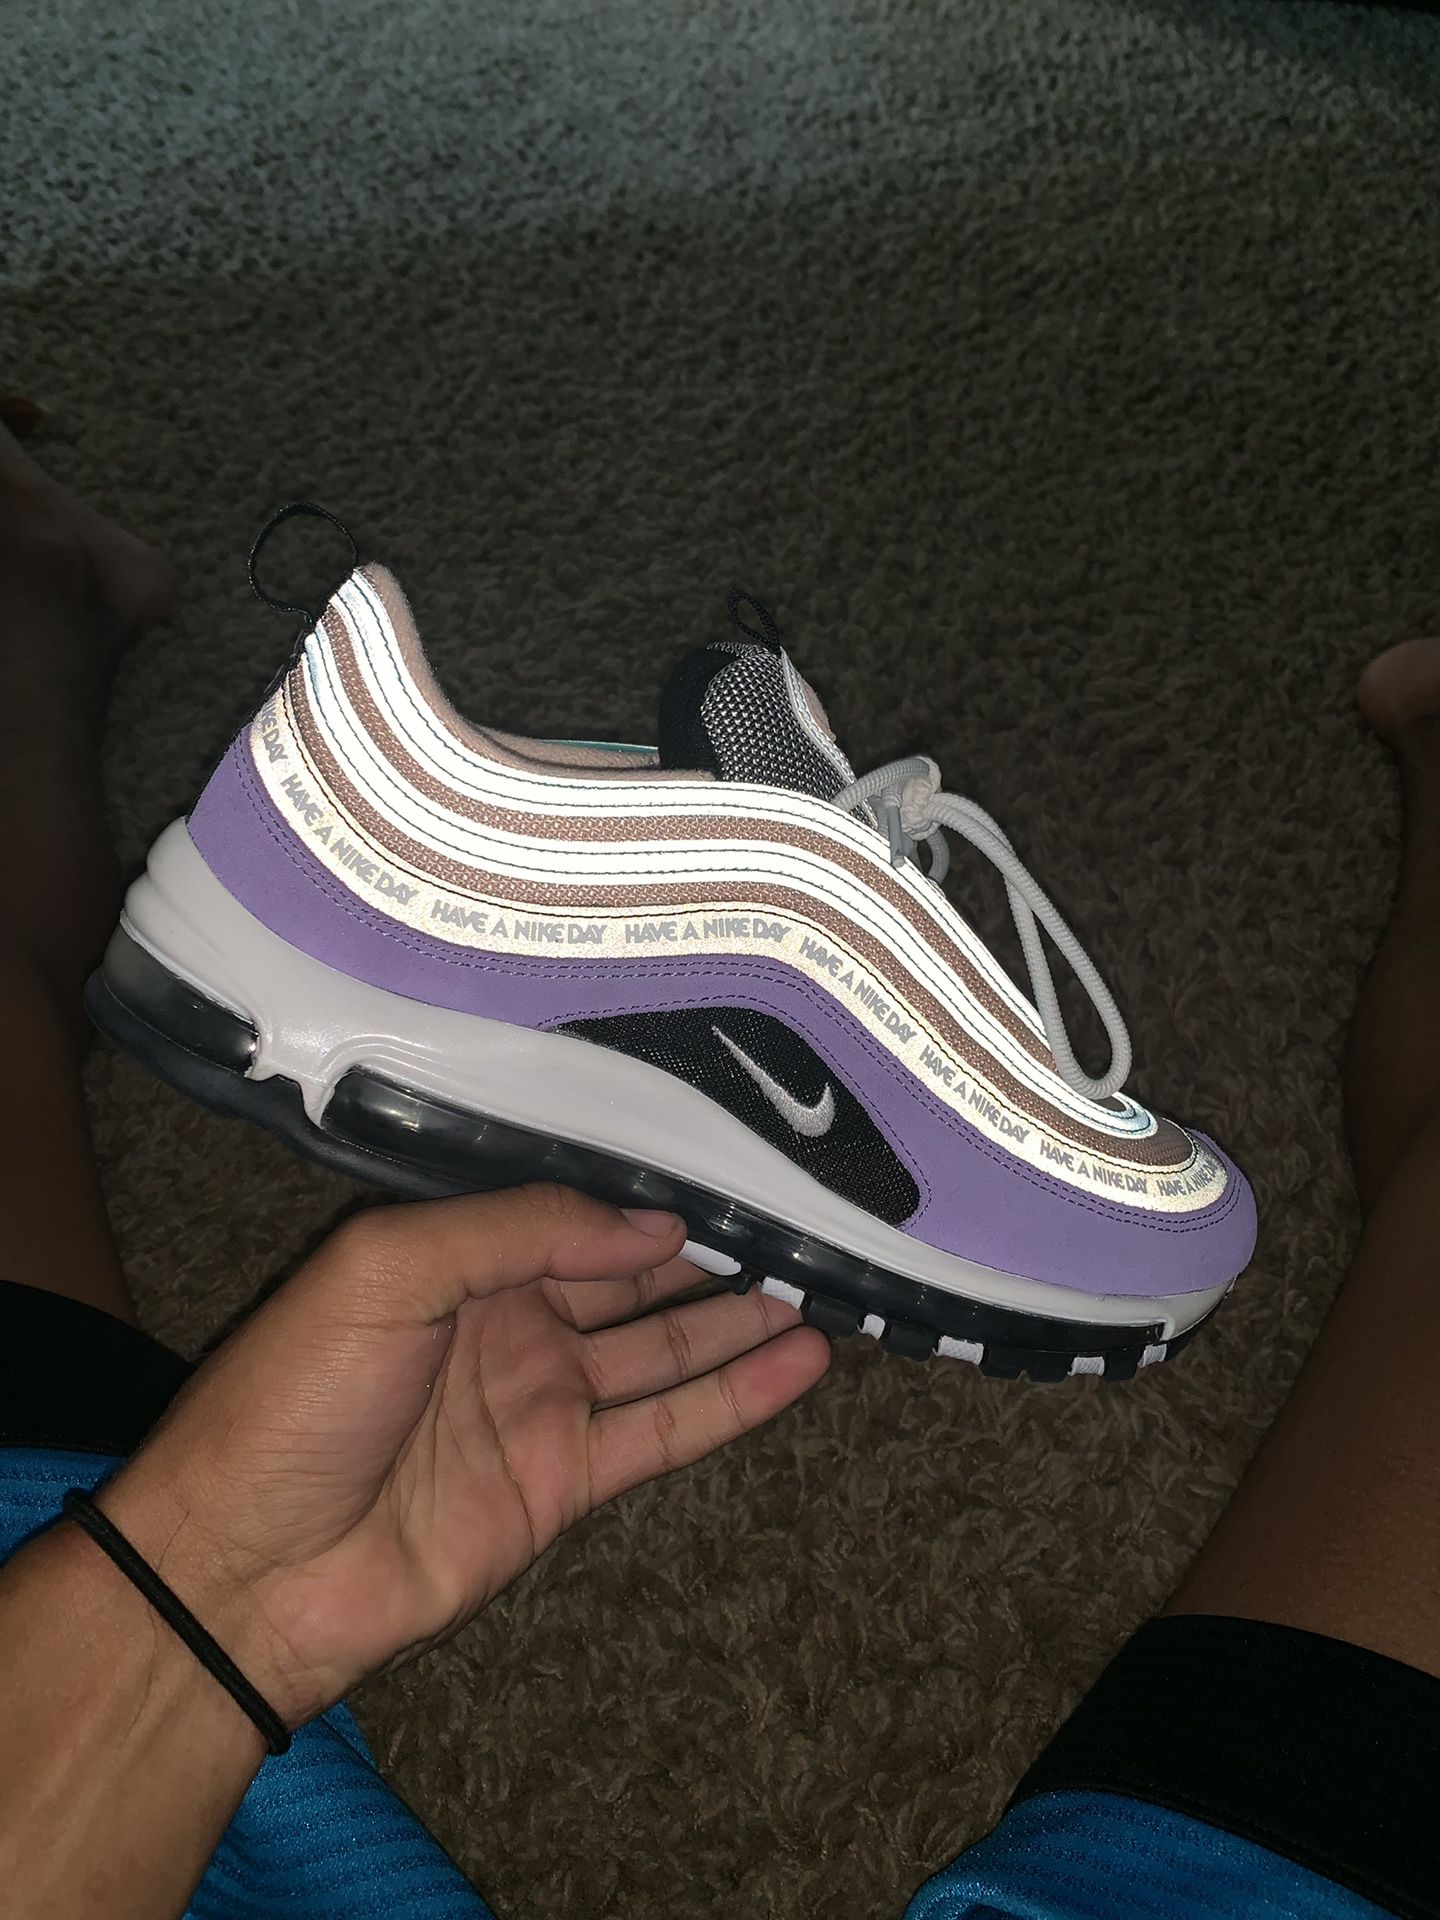 Air Maxes “have a nike day”